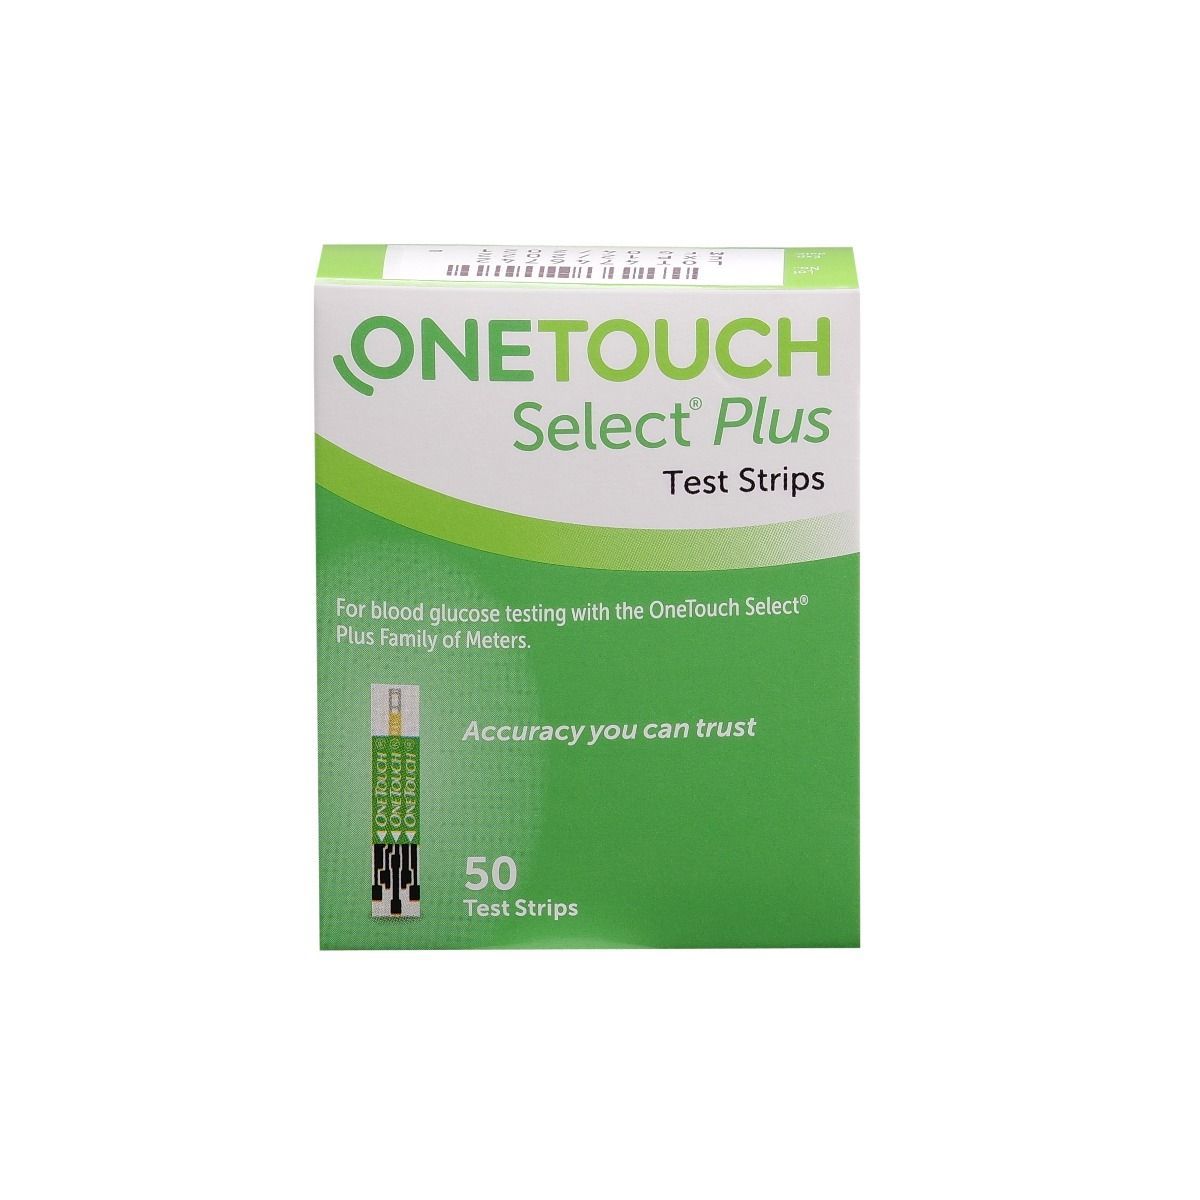 Buy OneTouch Select Plus Test Strips, 50 Count Online